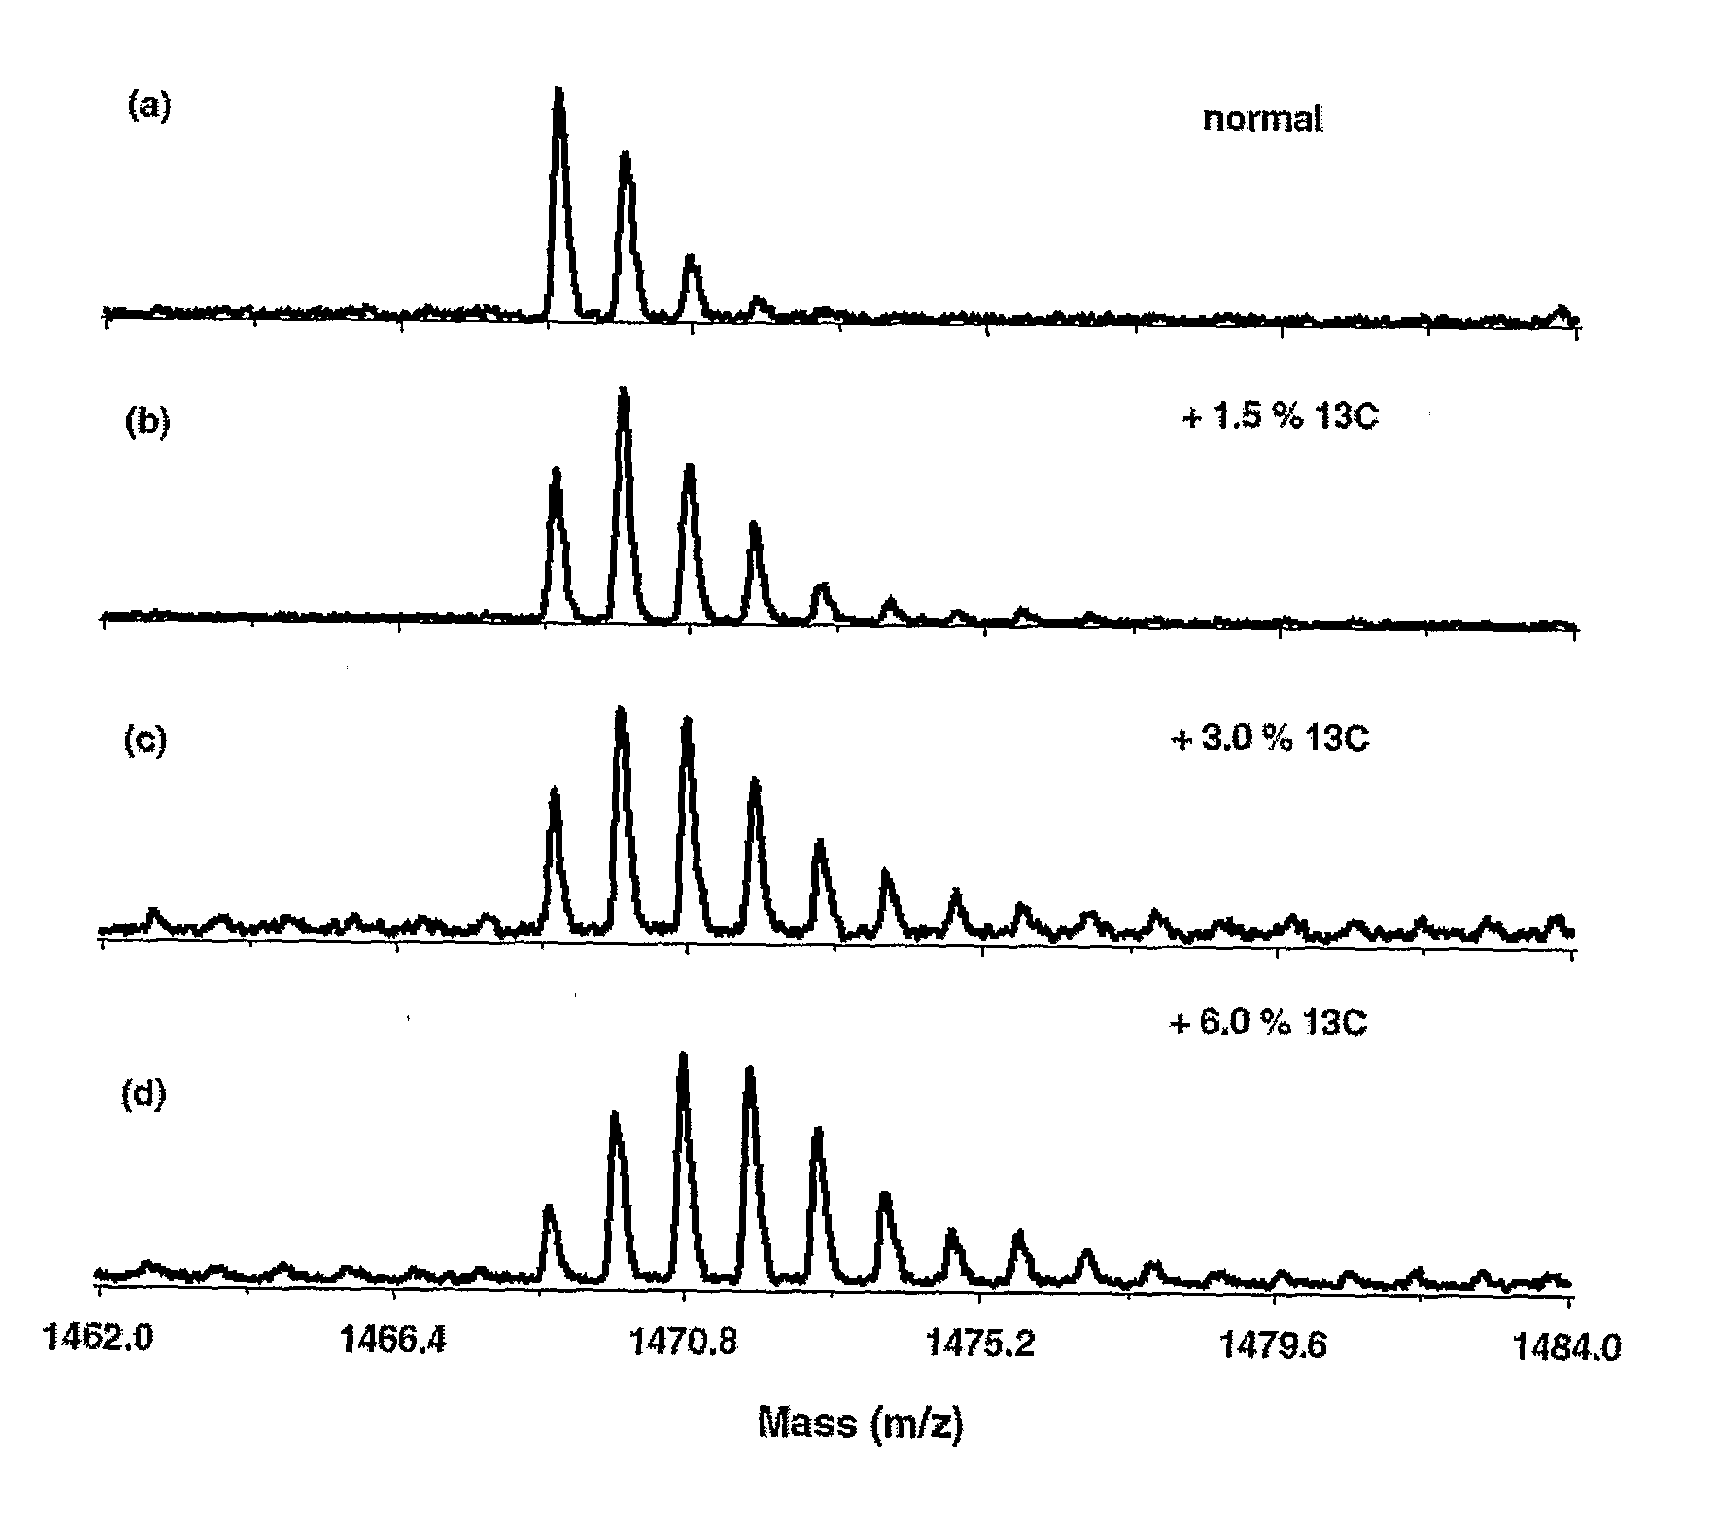 System and Method for Expression Proteomics Based on Isotope Ratio Modification